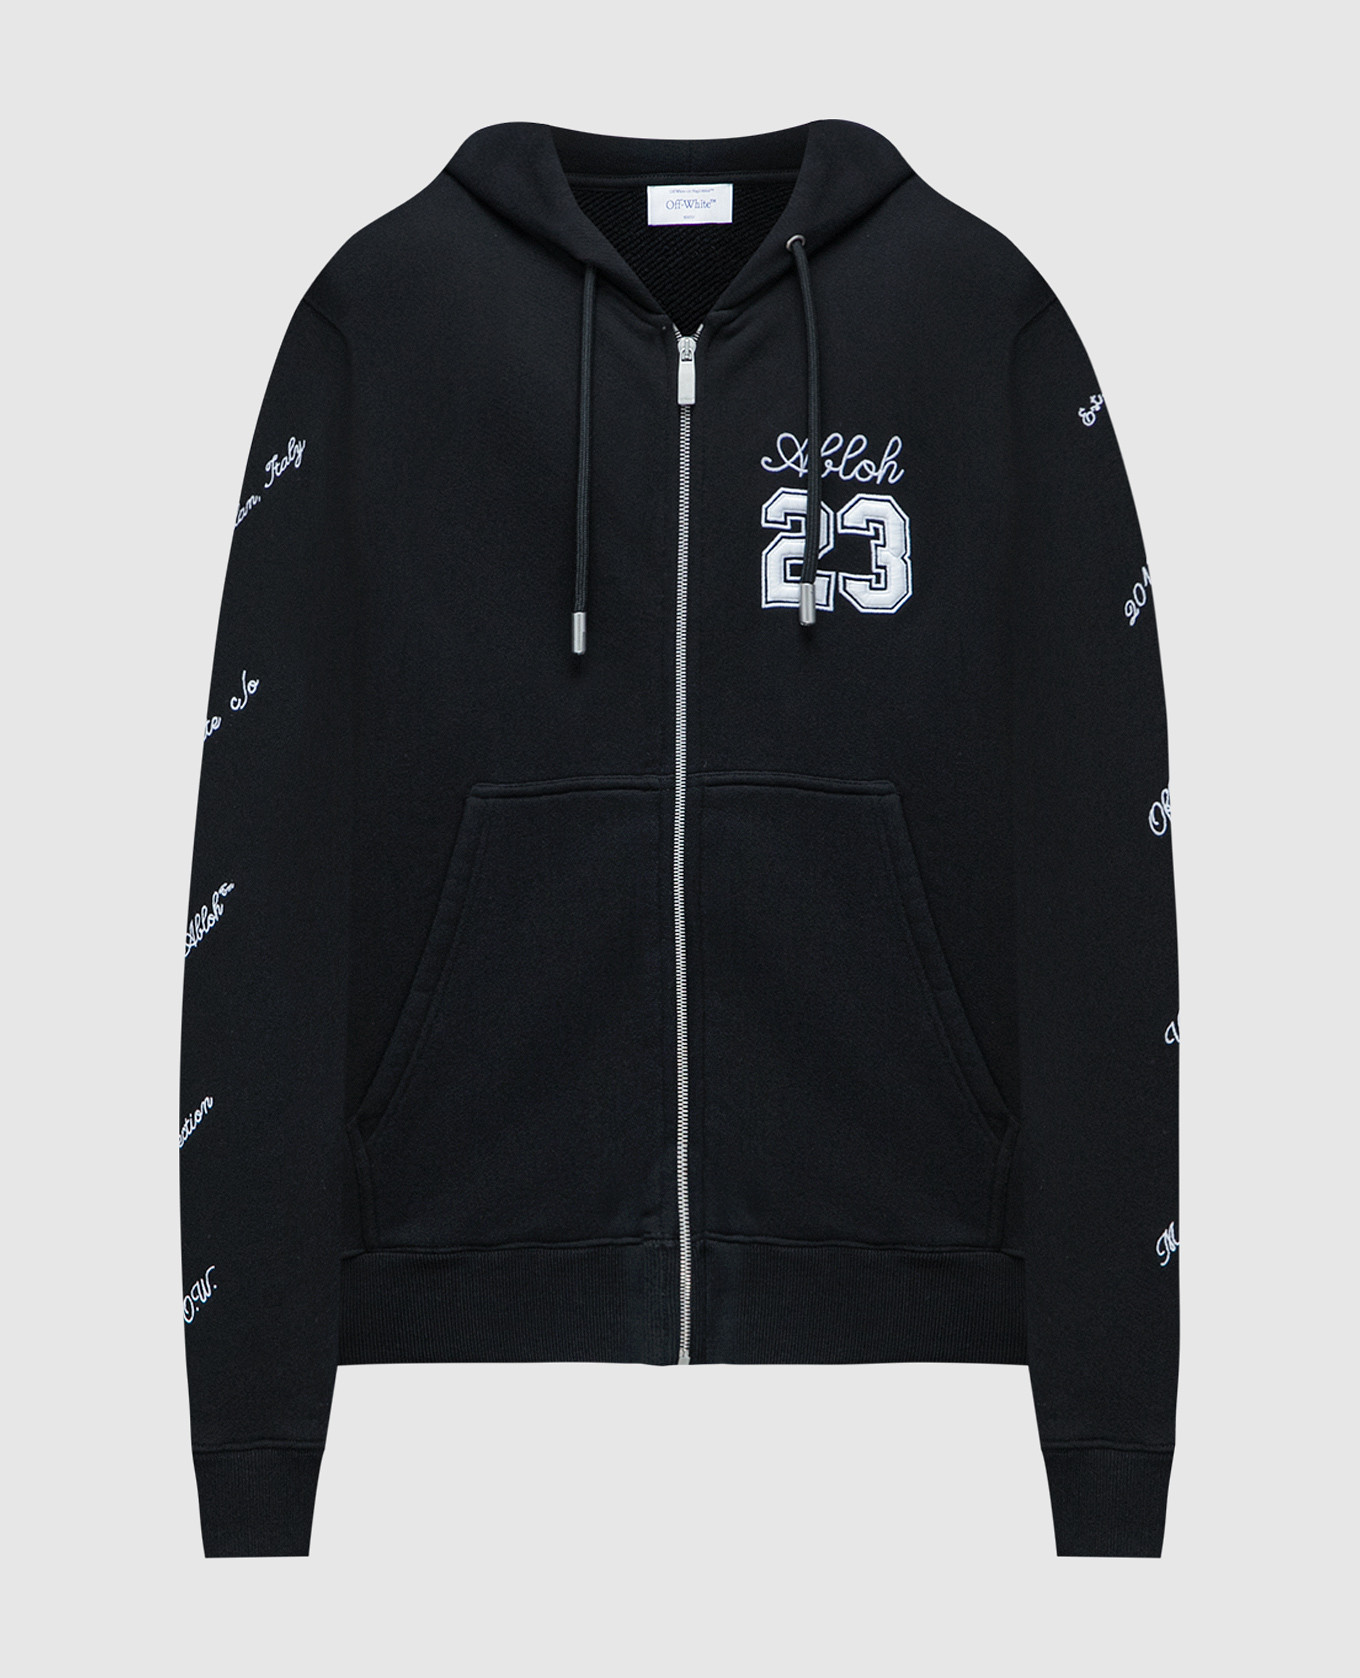 Black sports jacket with 23 Logo embroidery